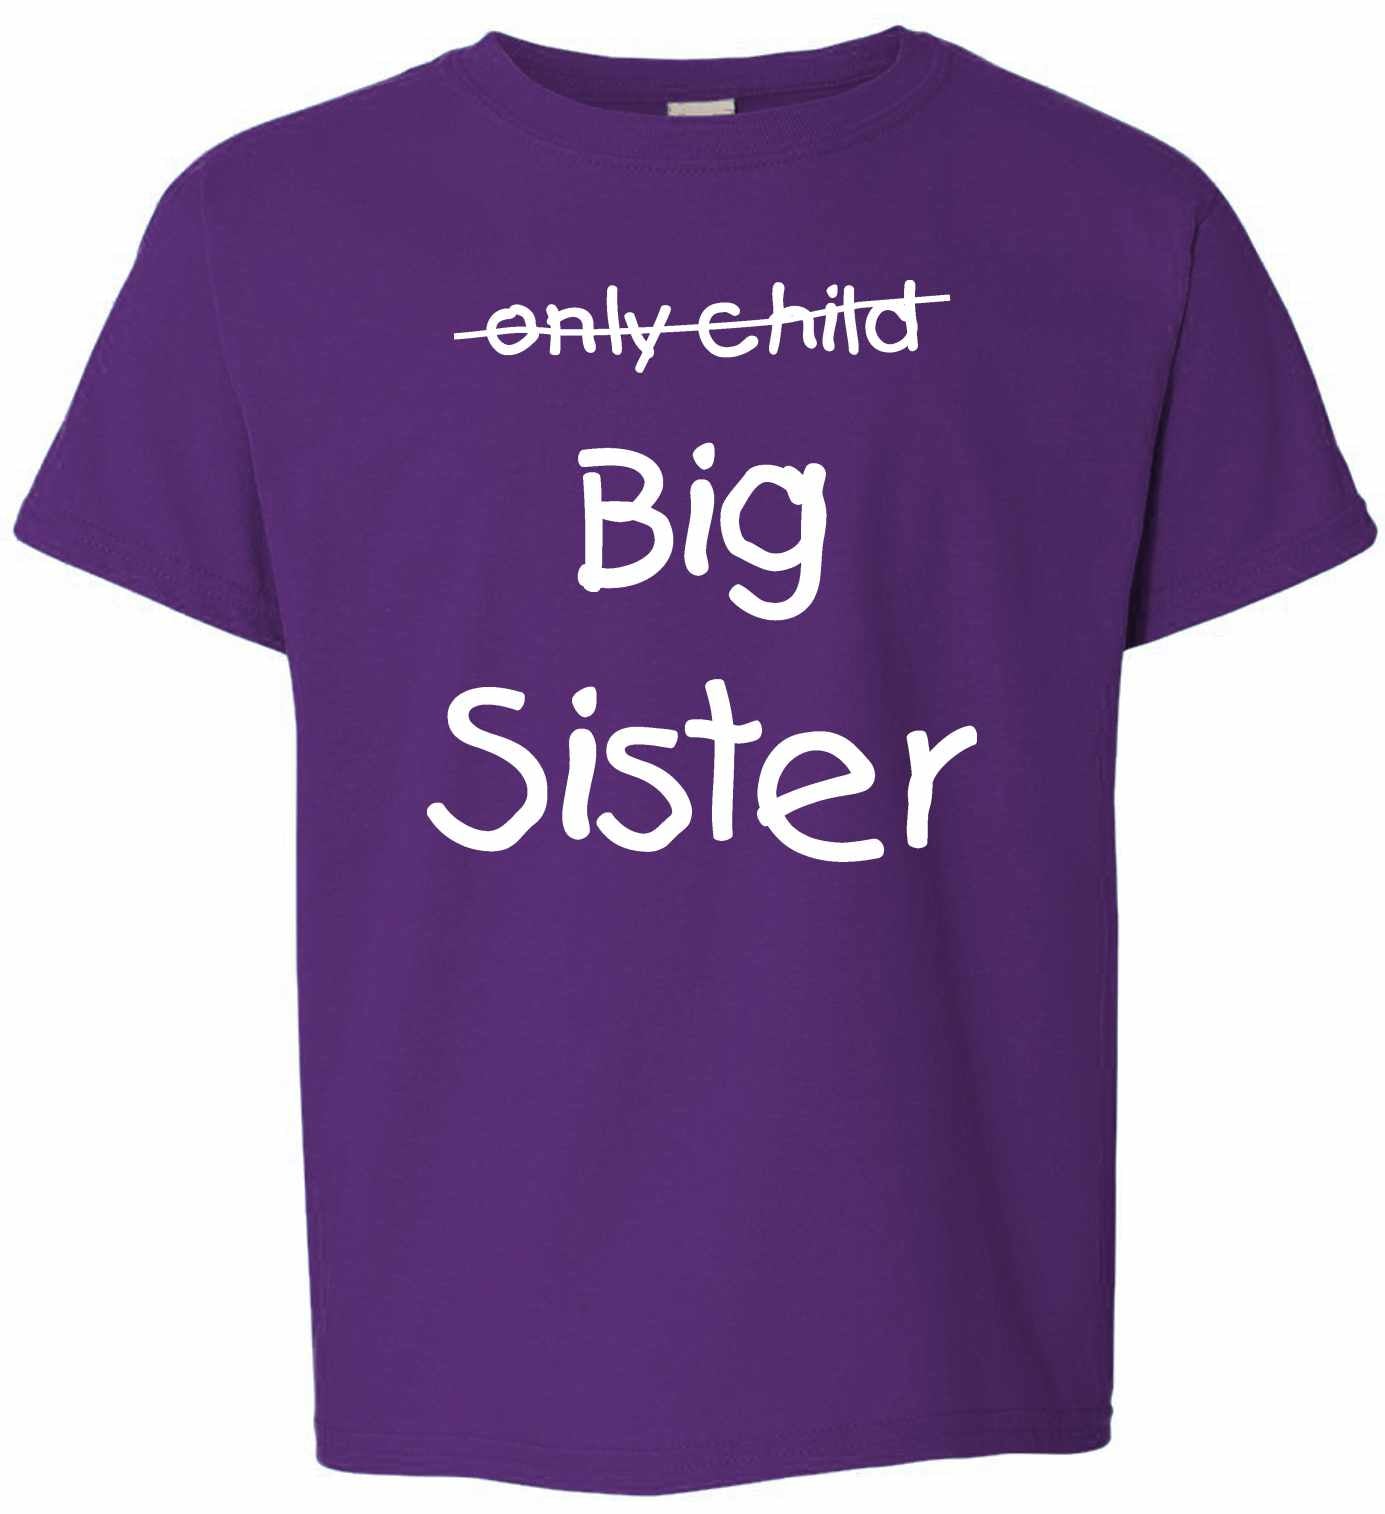 Only Child BIG SISTER on Kids T-Shirt